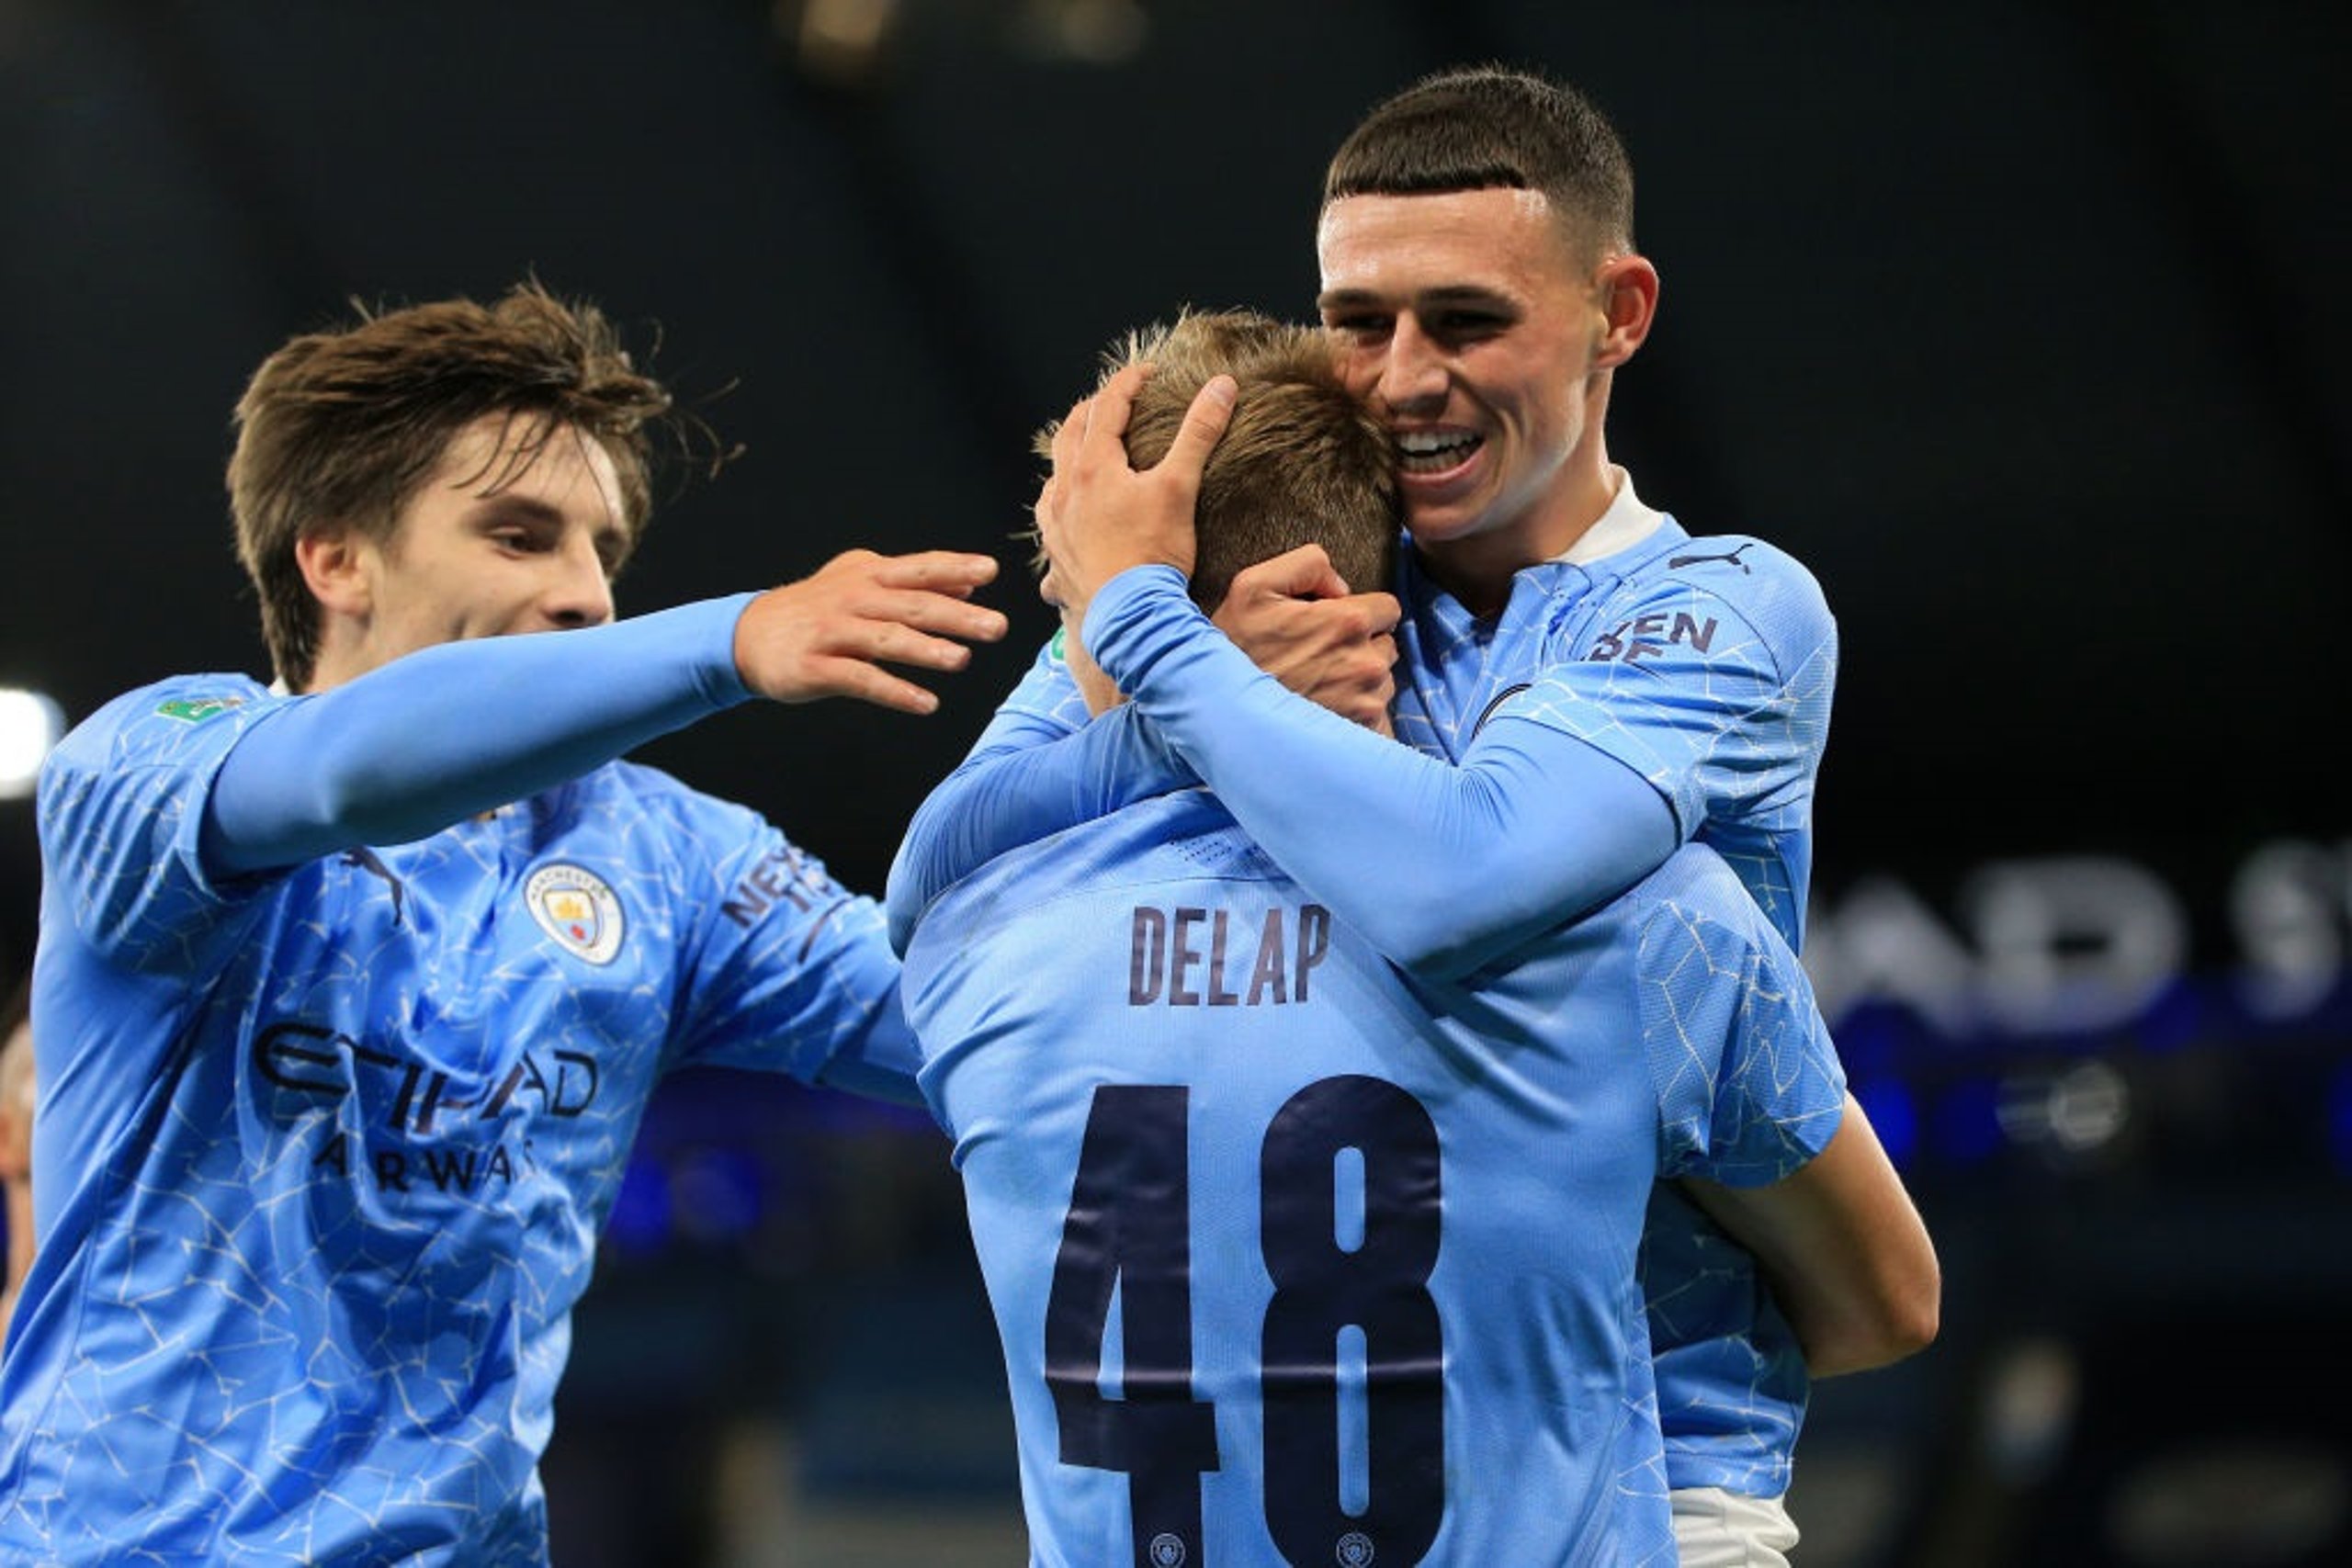 Phil Foden and Adrian Bernabe congratulate Delap